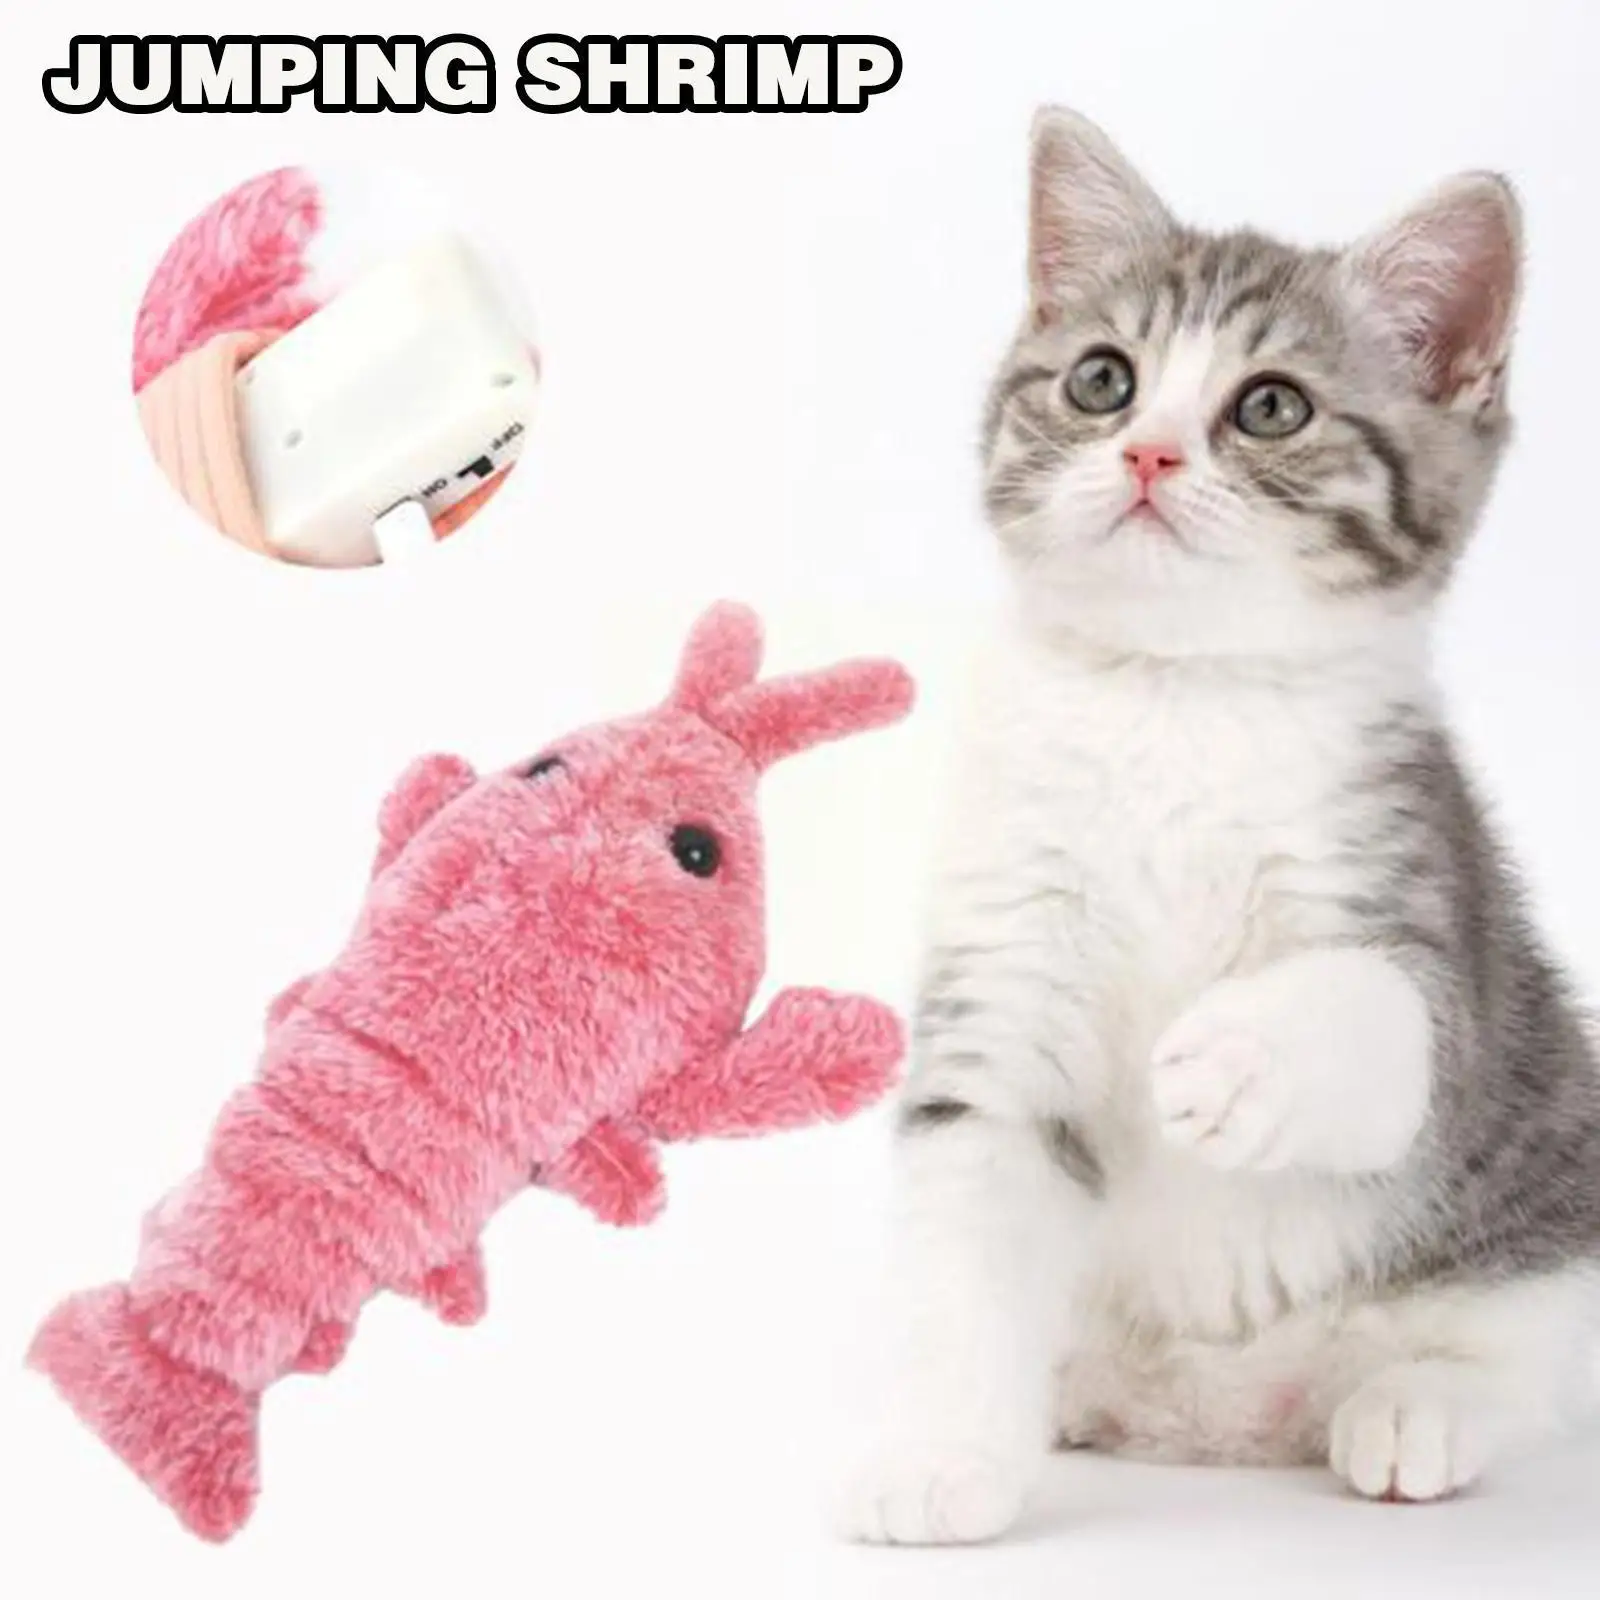 

Cat toy Electric Jumping Shrimp Moving Simulation Lobster Electronic Plush Toys For Pet dog cat Children Stuffed Animal toy U2Q5